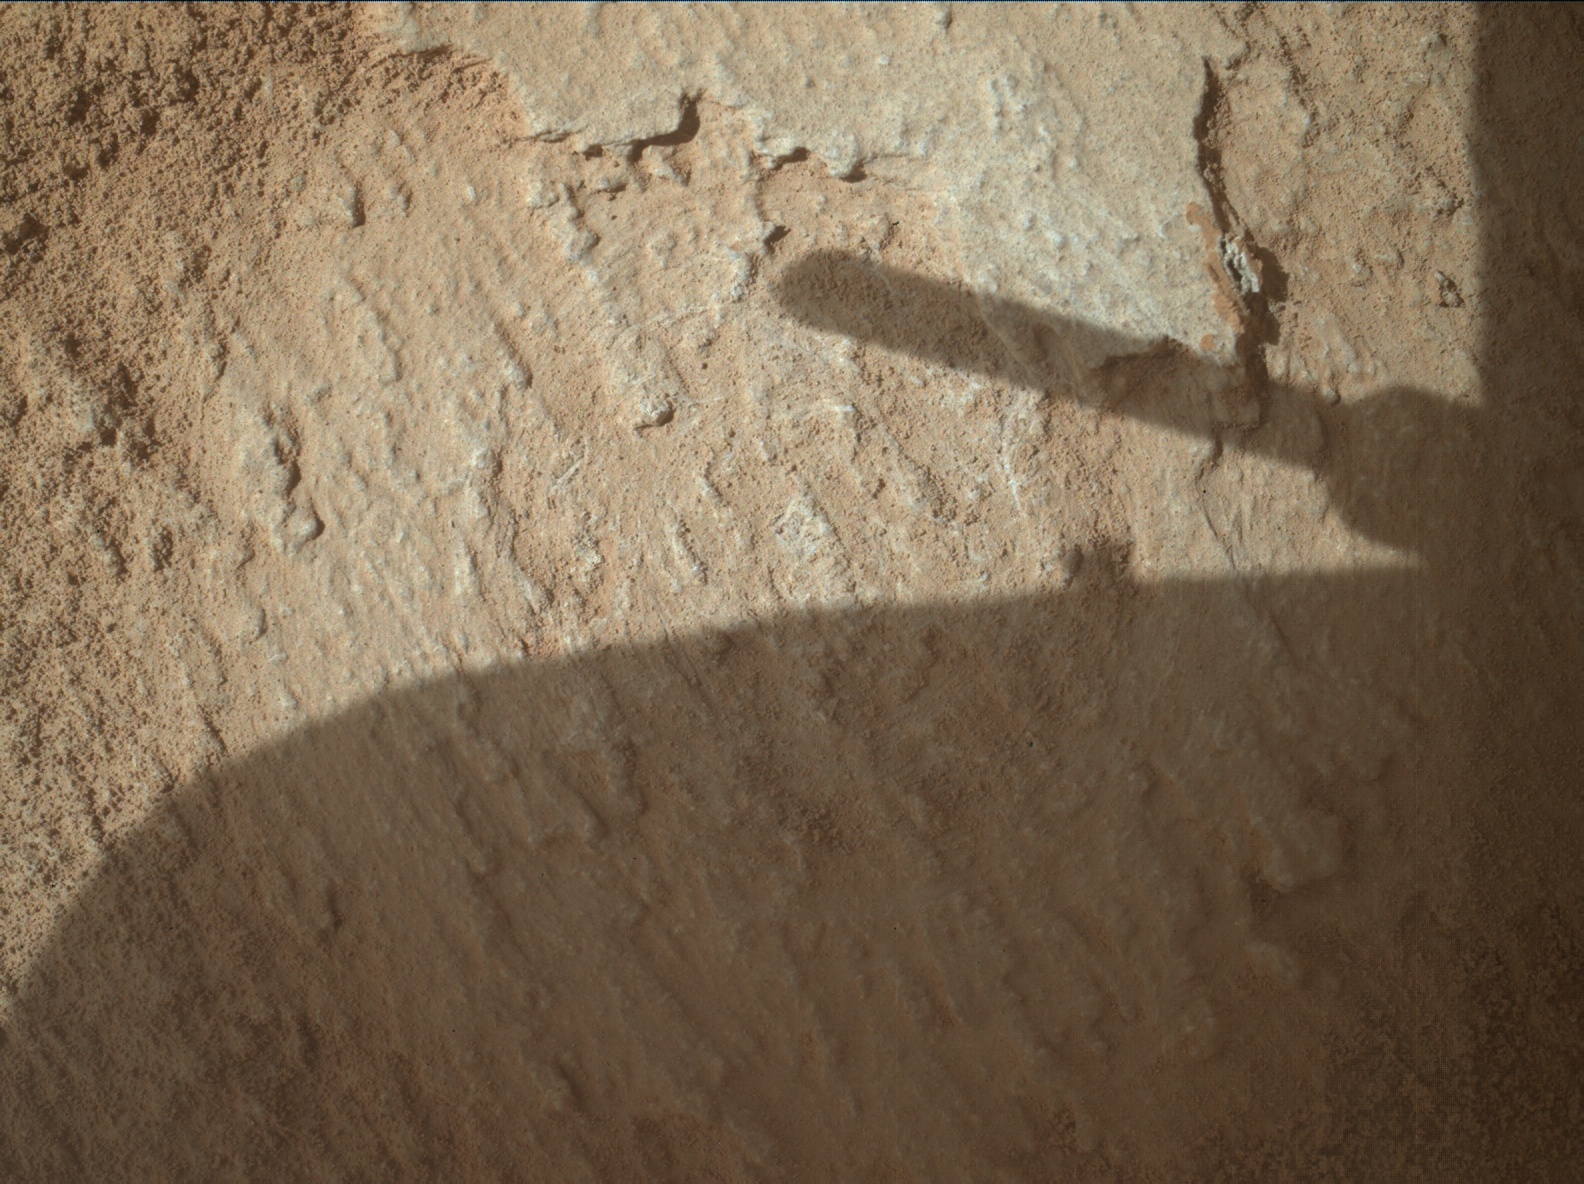 Nasa's Mars rover Curiosity acquired this image using its Mars Hand Lens Imager (MAHLI) on Sol 3778